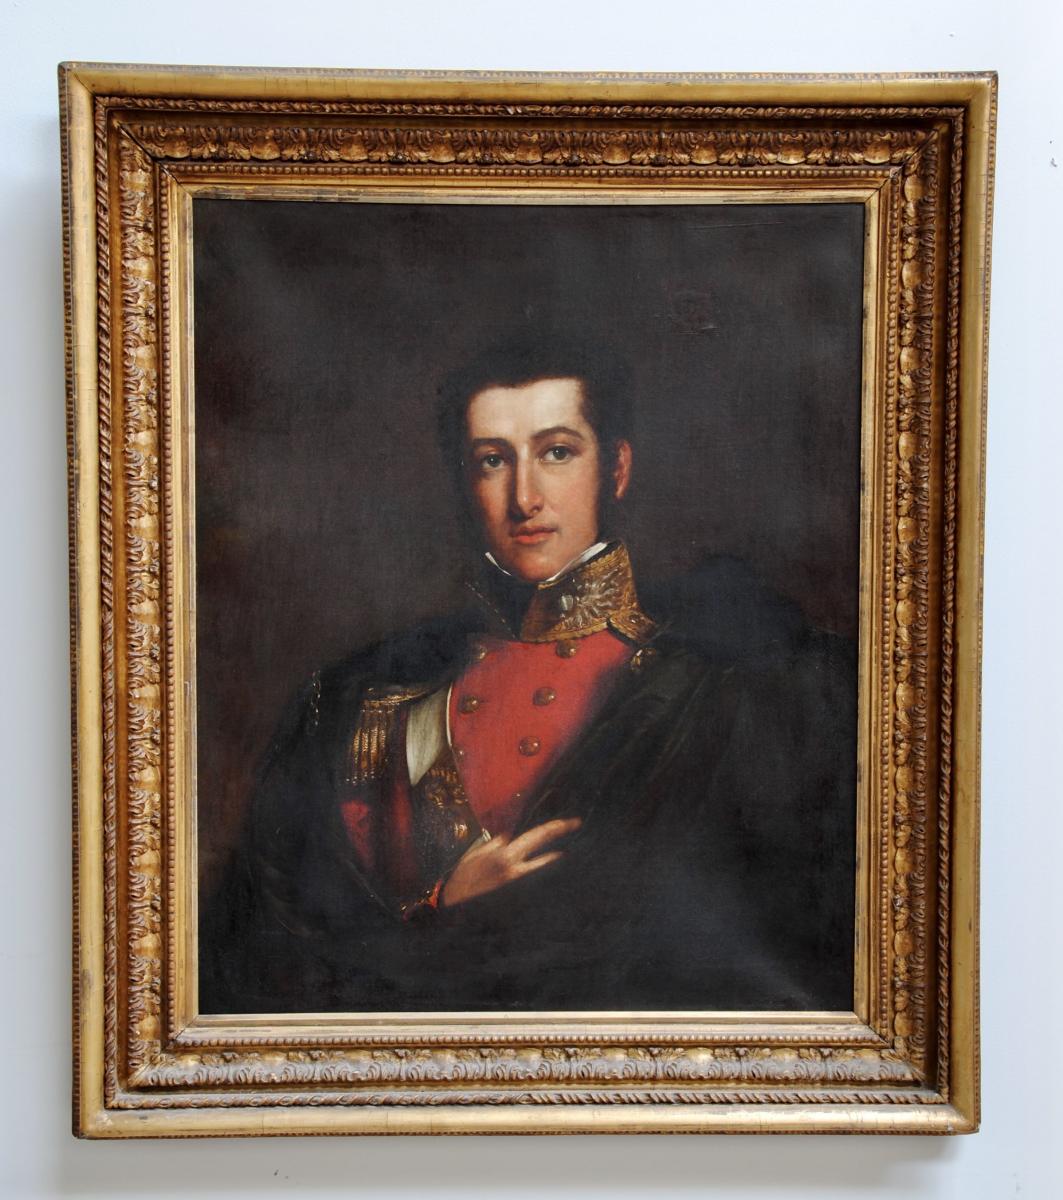 Portrait of an Officer, The Royal Fusiliers, English, Circa 1830